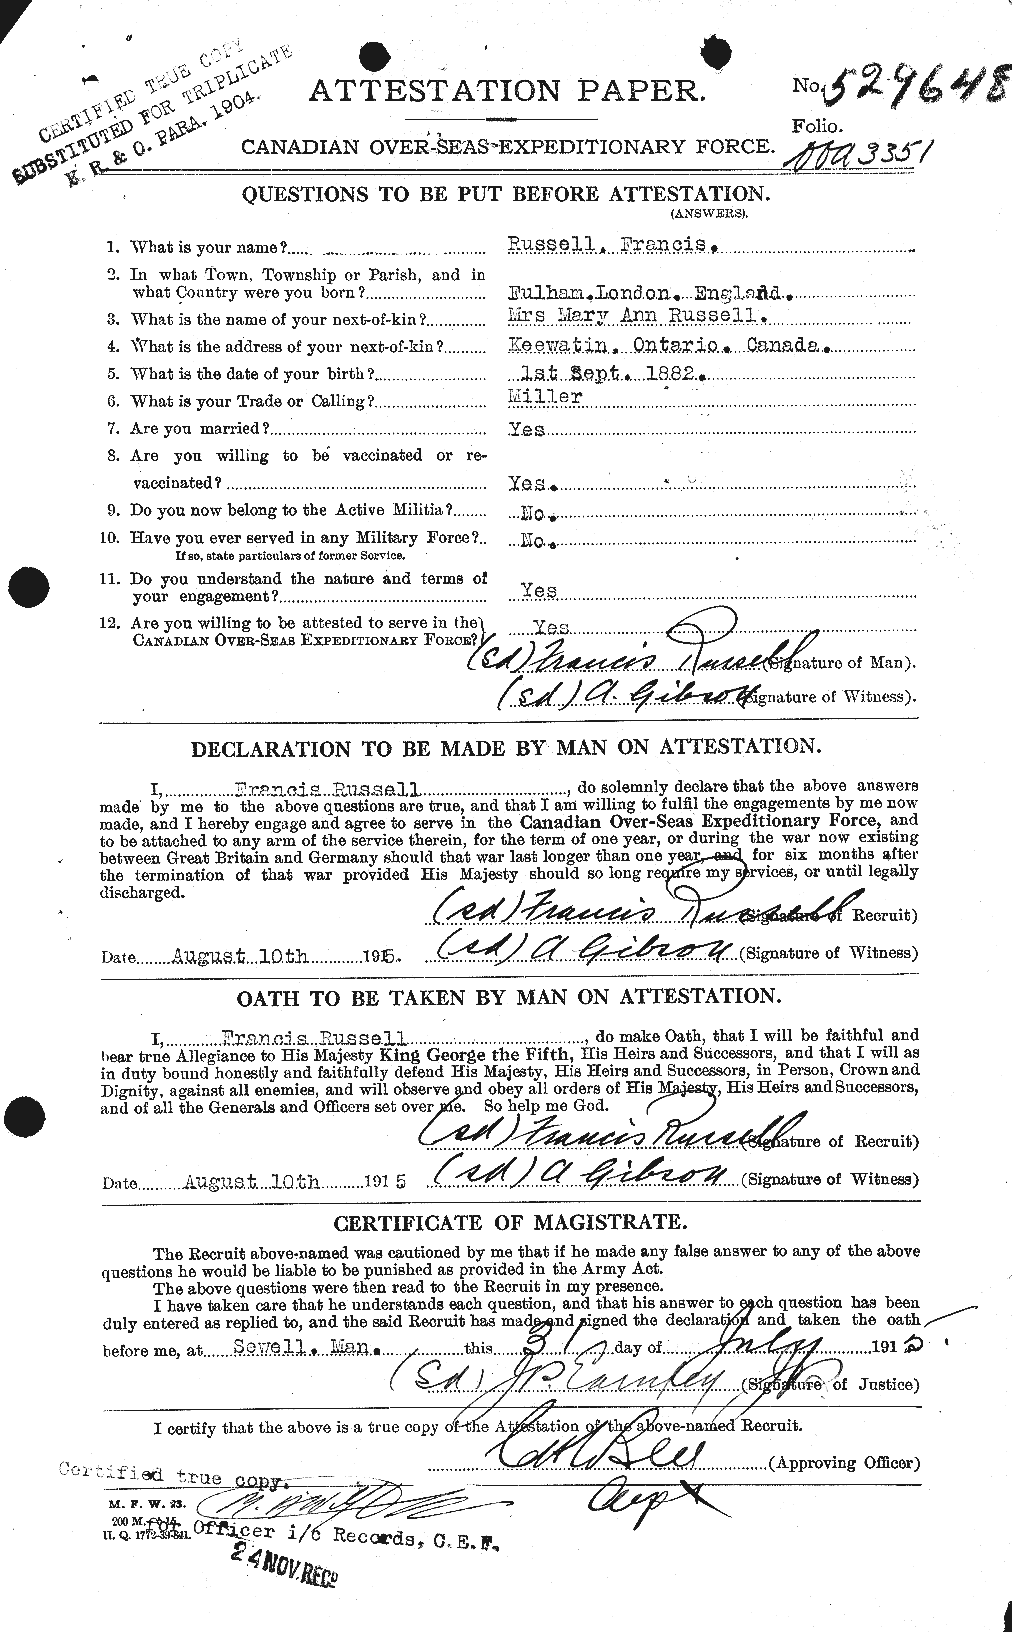 Personnel Records of the First World War - CEF 618866a